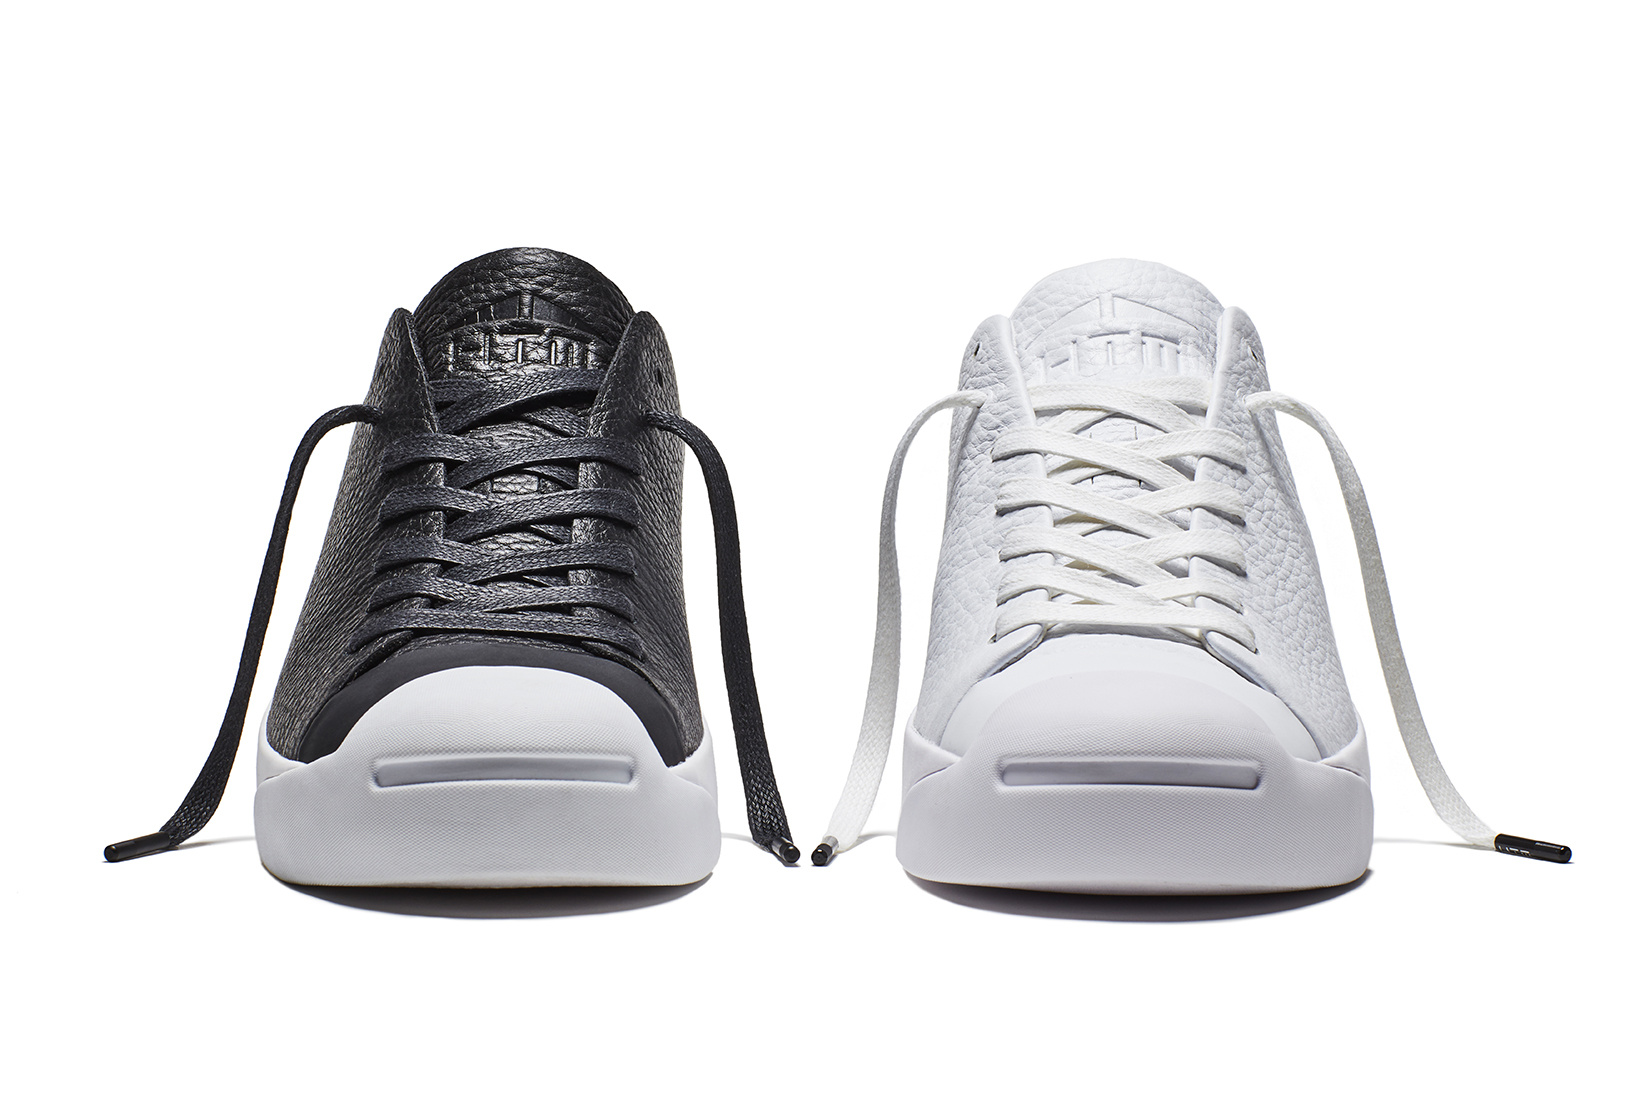 converse-jack-purcell-modern-htm-101